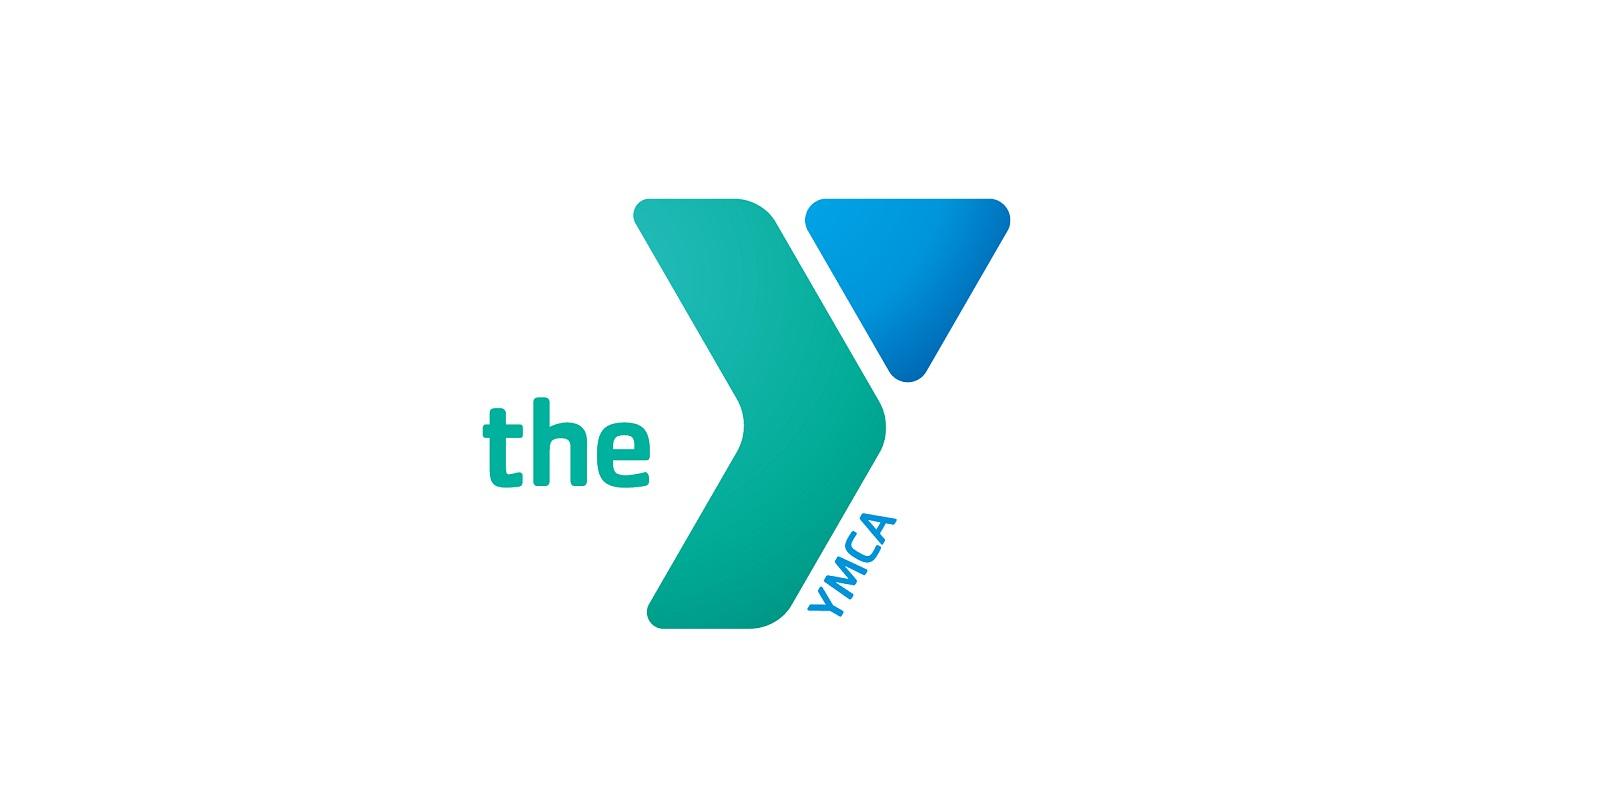 The Greater Valley YMCA